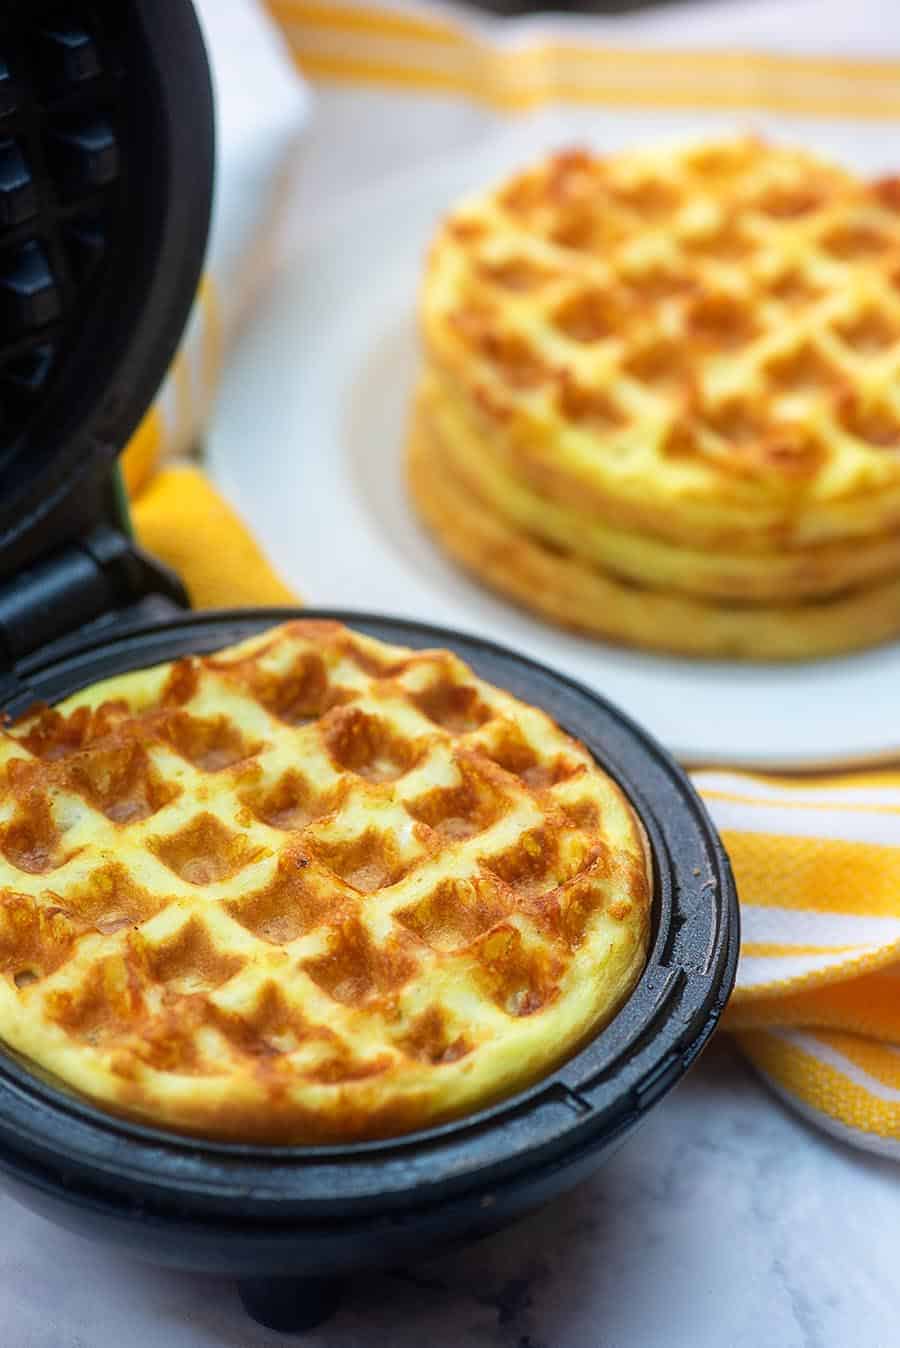 Chaffles! What they are, how to make them, and all your FAQs answered about these low carb waffles that are taking the internet by storm! #lowcarb #keto #chaffles